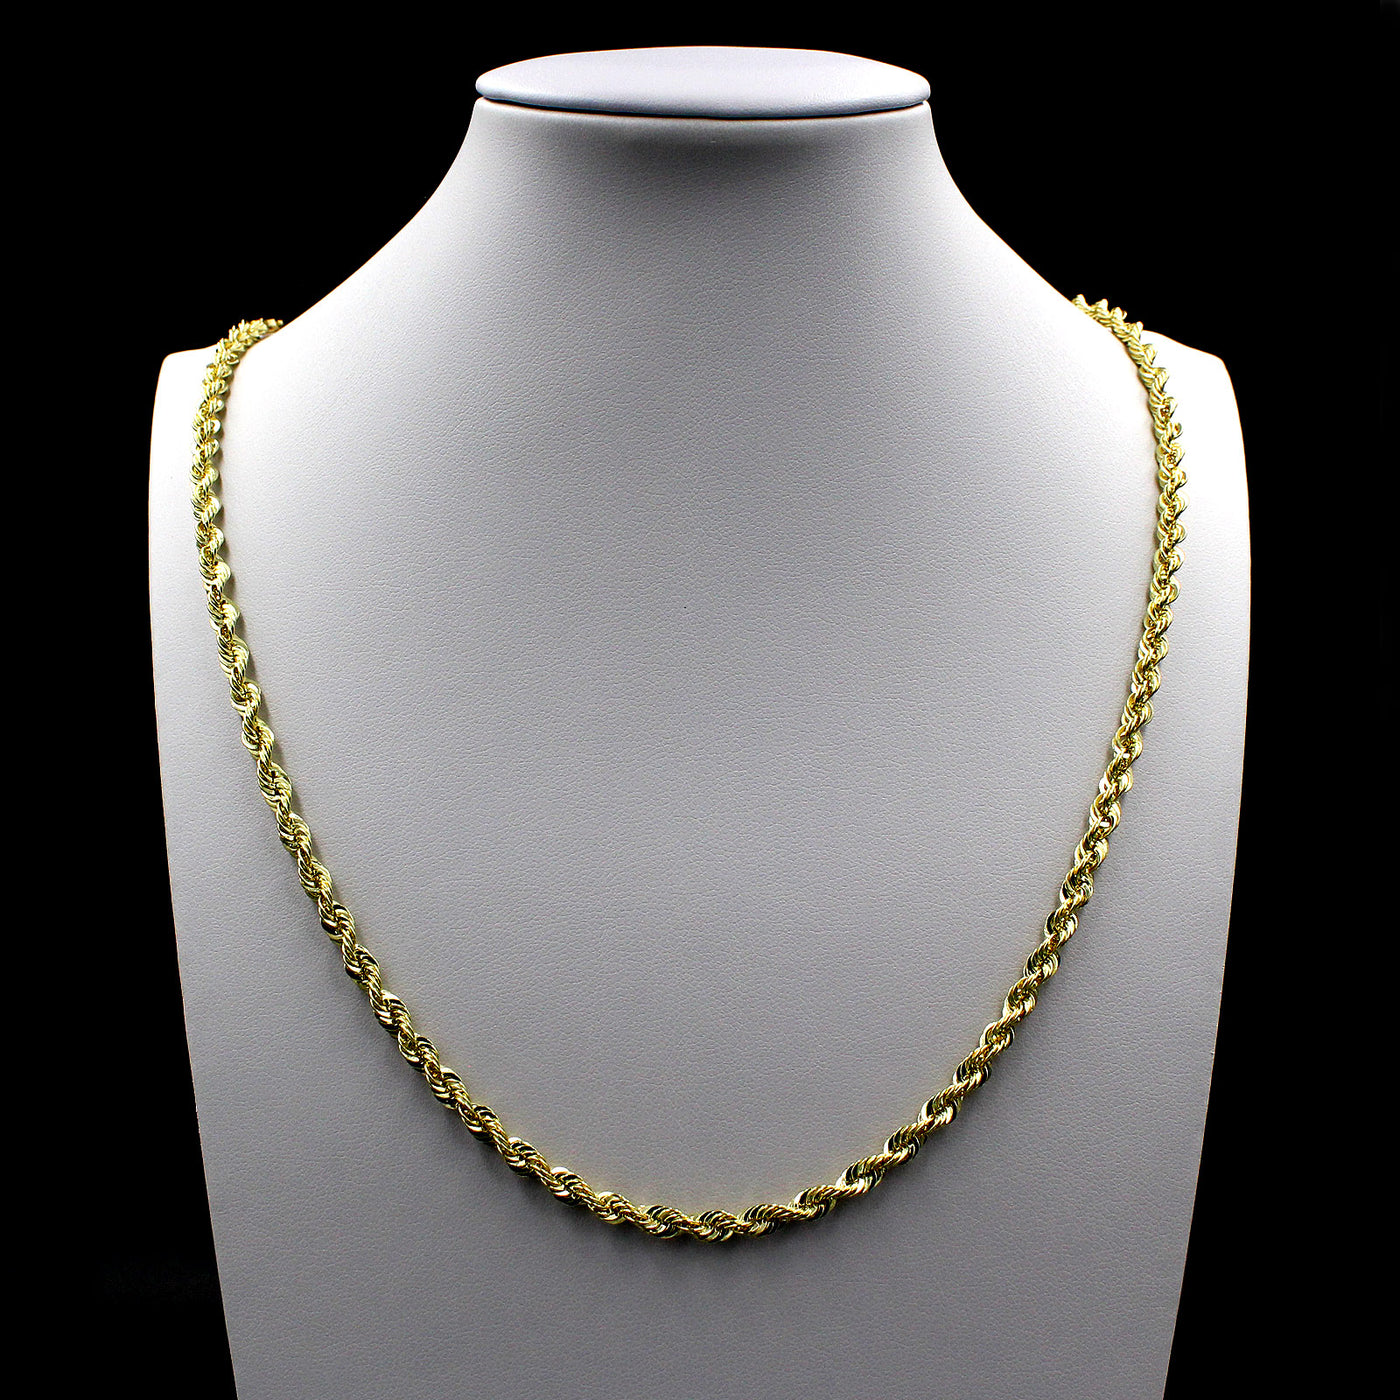 10K Yellow Gold Rope Chain Necklace 16'' - 30" 2mm 2.5mm 3mm 4mm 5mm 6mm